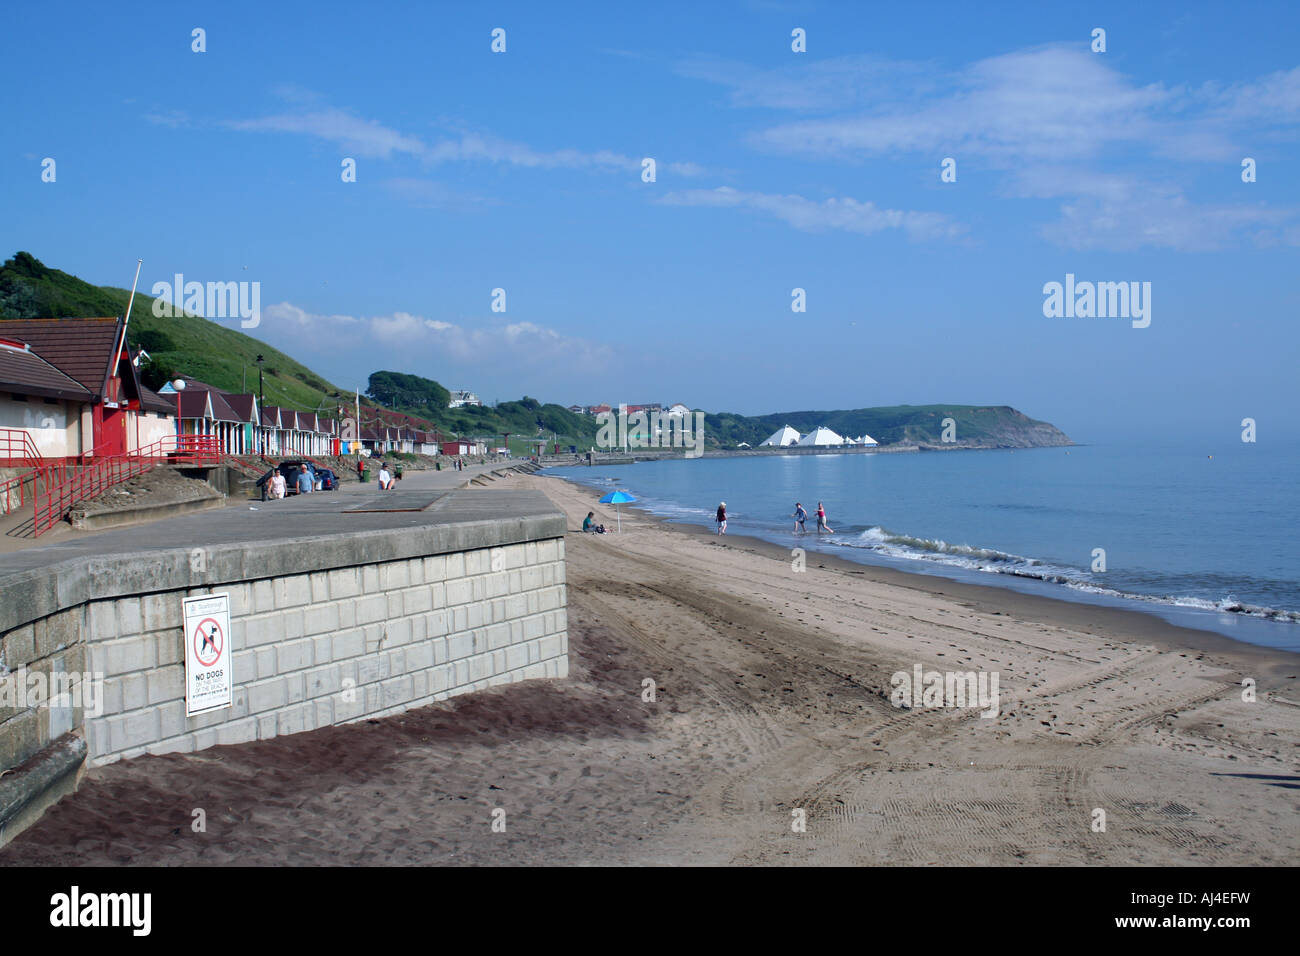 North Bay beach and chalets, Scarborough, North Yorkshire, England. Stock Photo